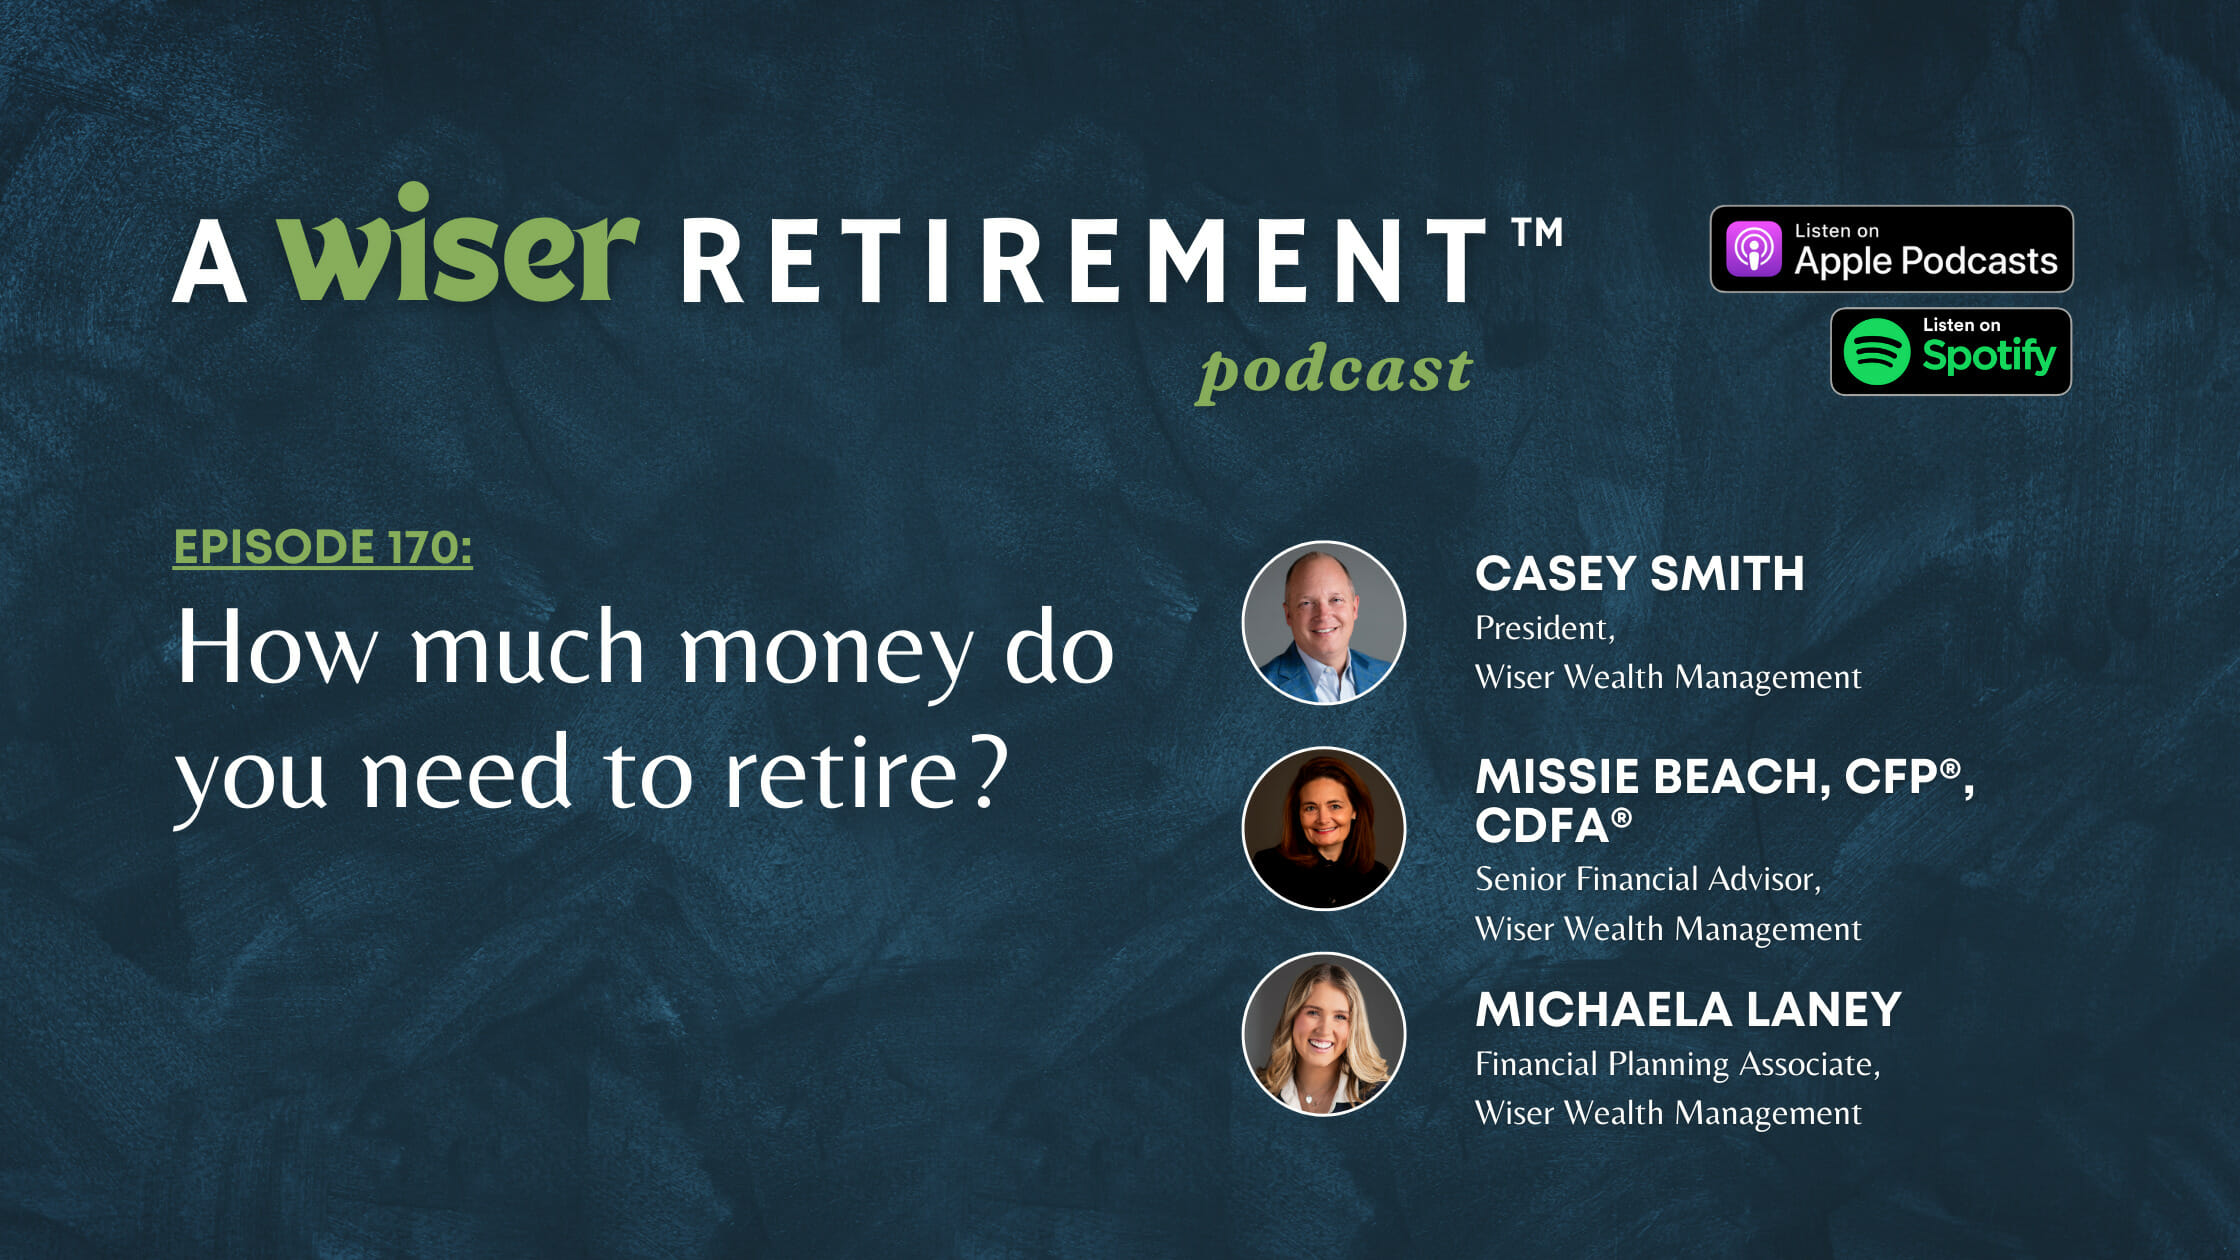 How much money do you need to retire?